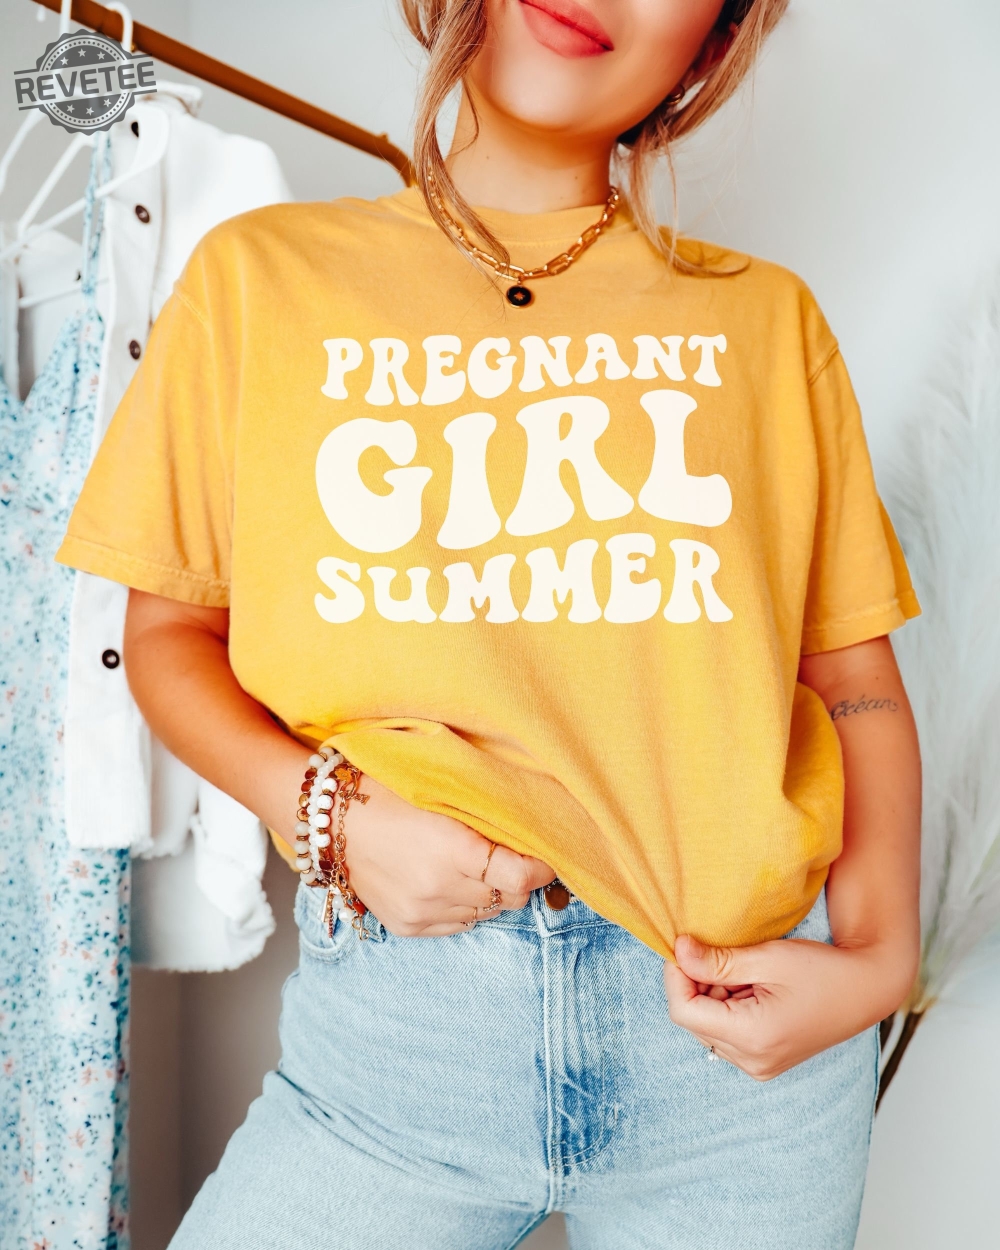 Pregnant Girl Summer Shirt Baby Announcement Pregnancy Reveal Funny Pregnant Shirt Gift For New Mom Unique